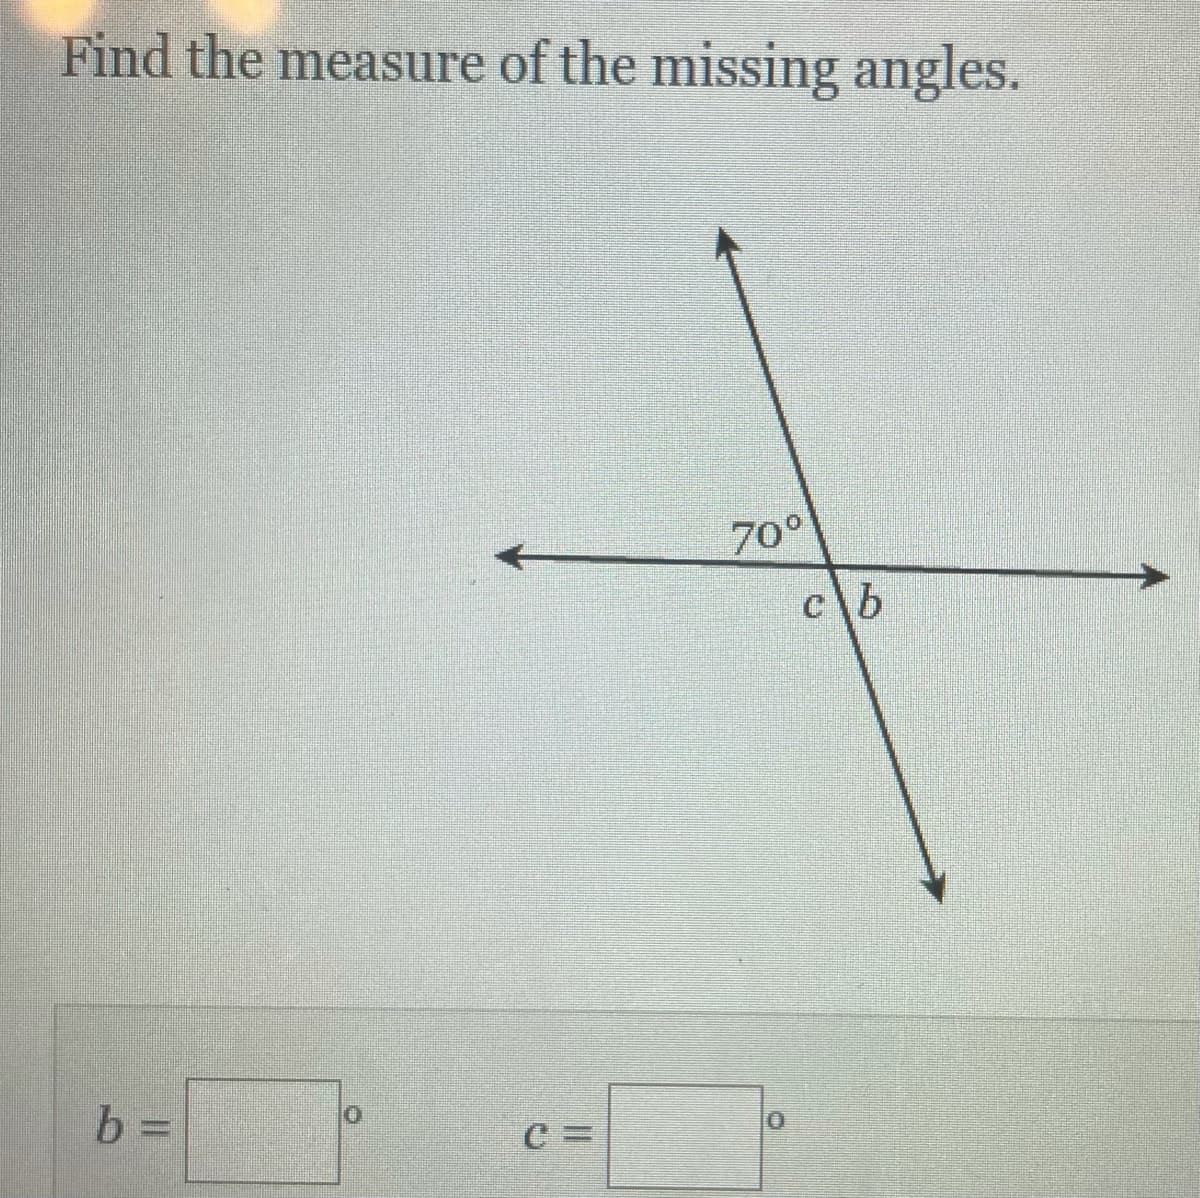 Find the measure of the missing angles.
700
c\b
b =
C =
